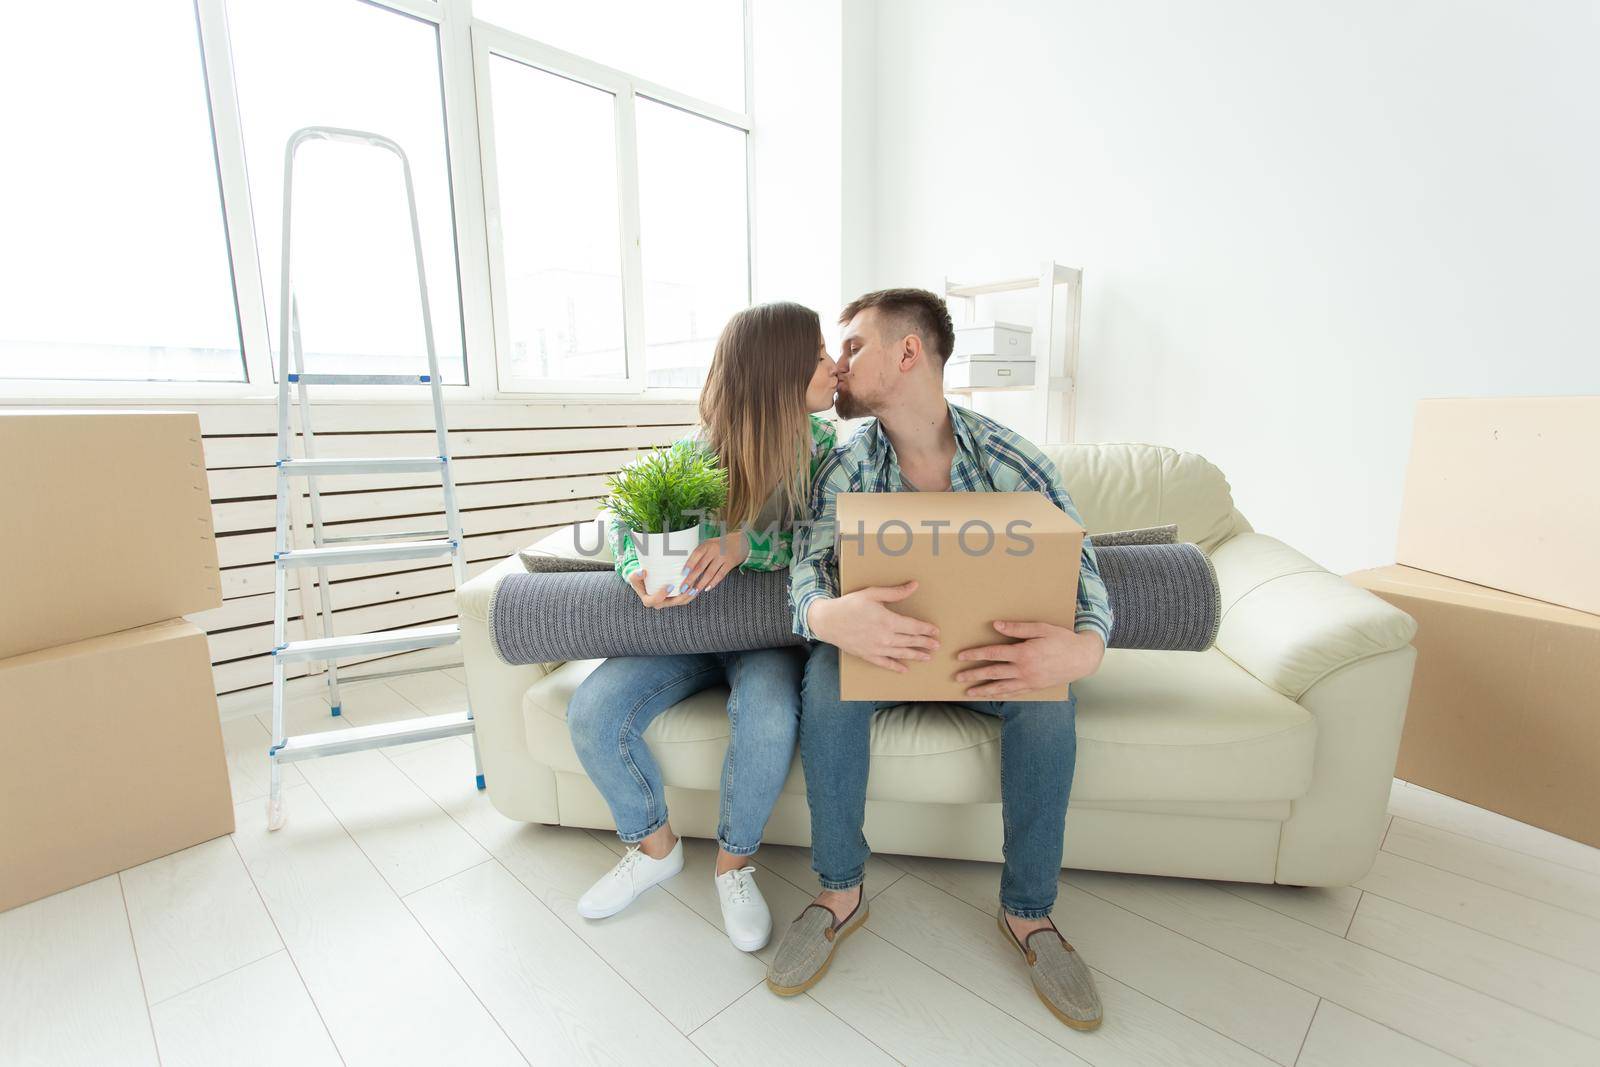 Charming young couple in casual clothes holding things in hands and sitting on sofa kissing to congratulate each other with housewarming. Concept of mortgage and housing affordability for young people